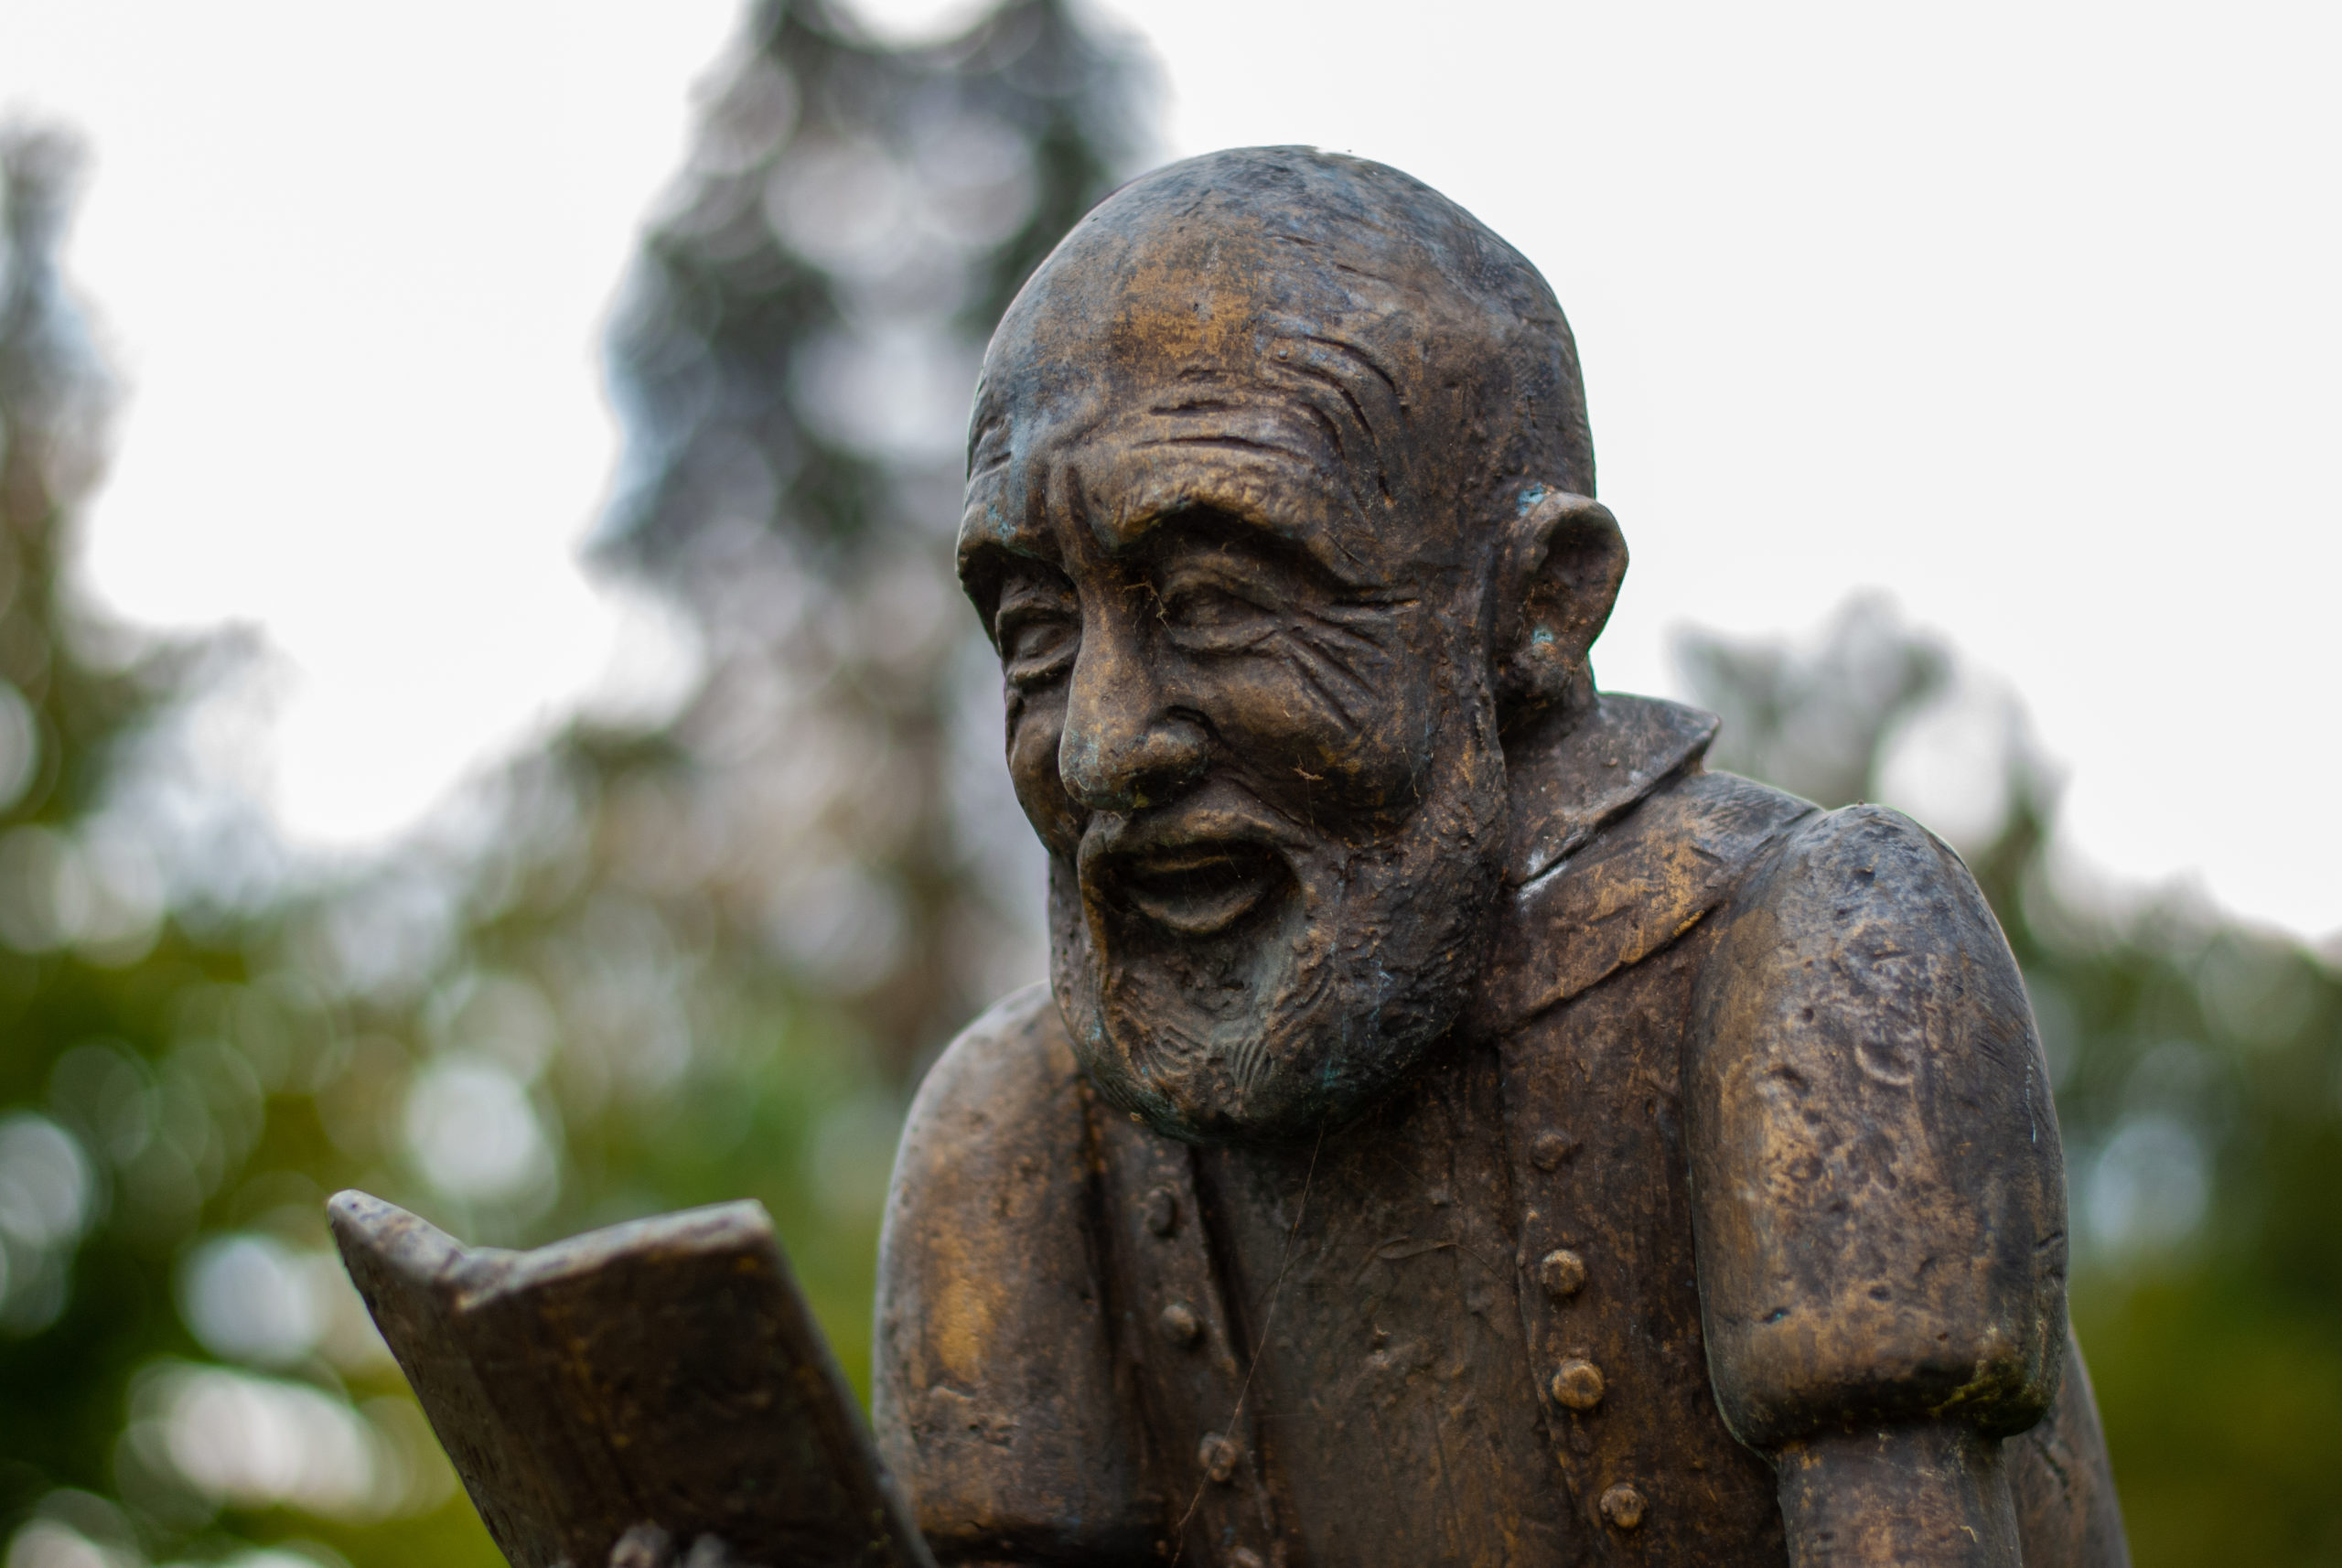 A statue smiling while reading